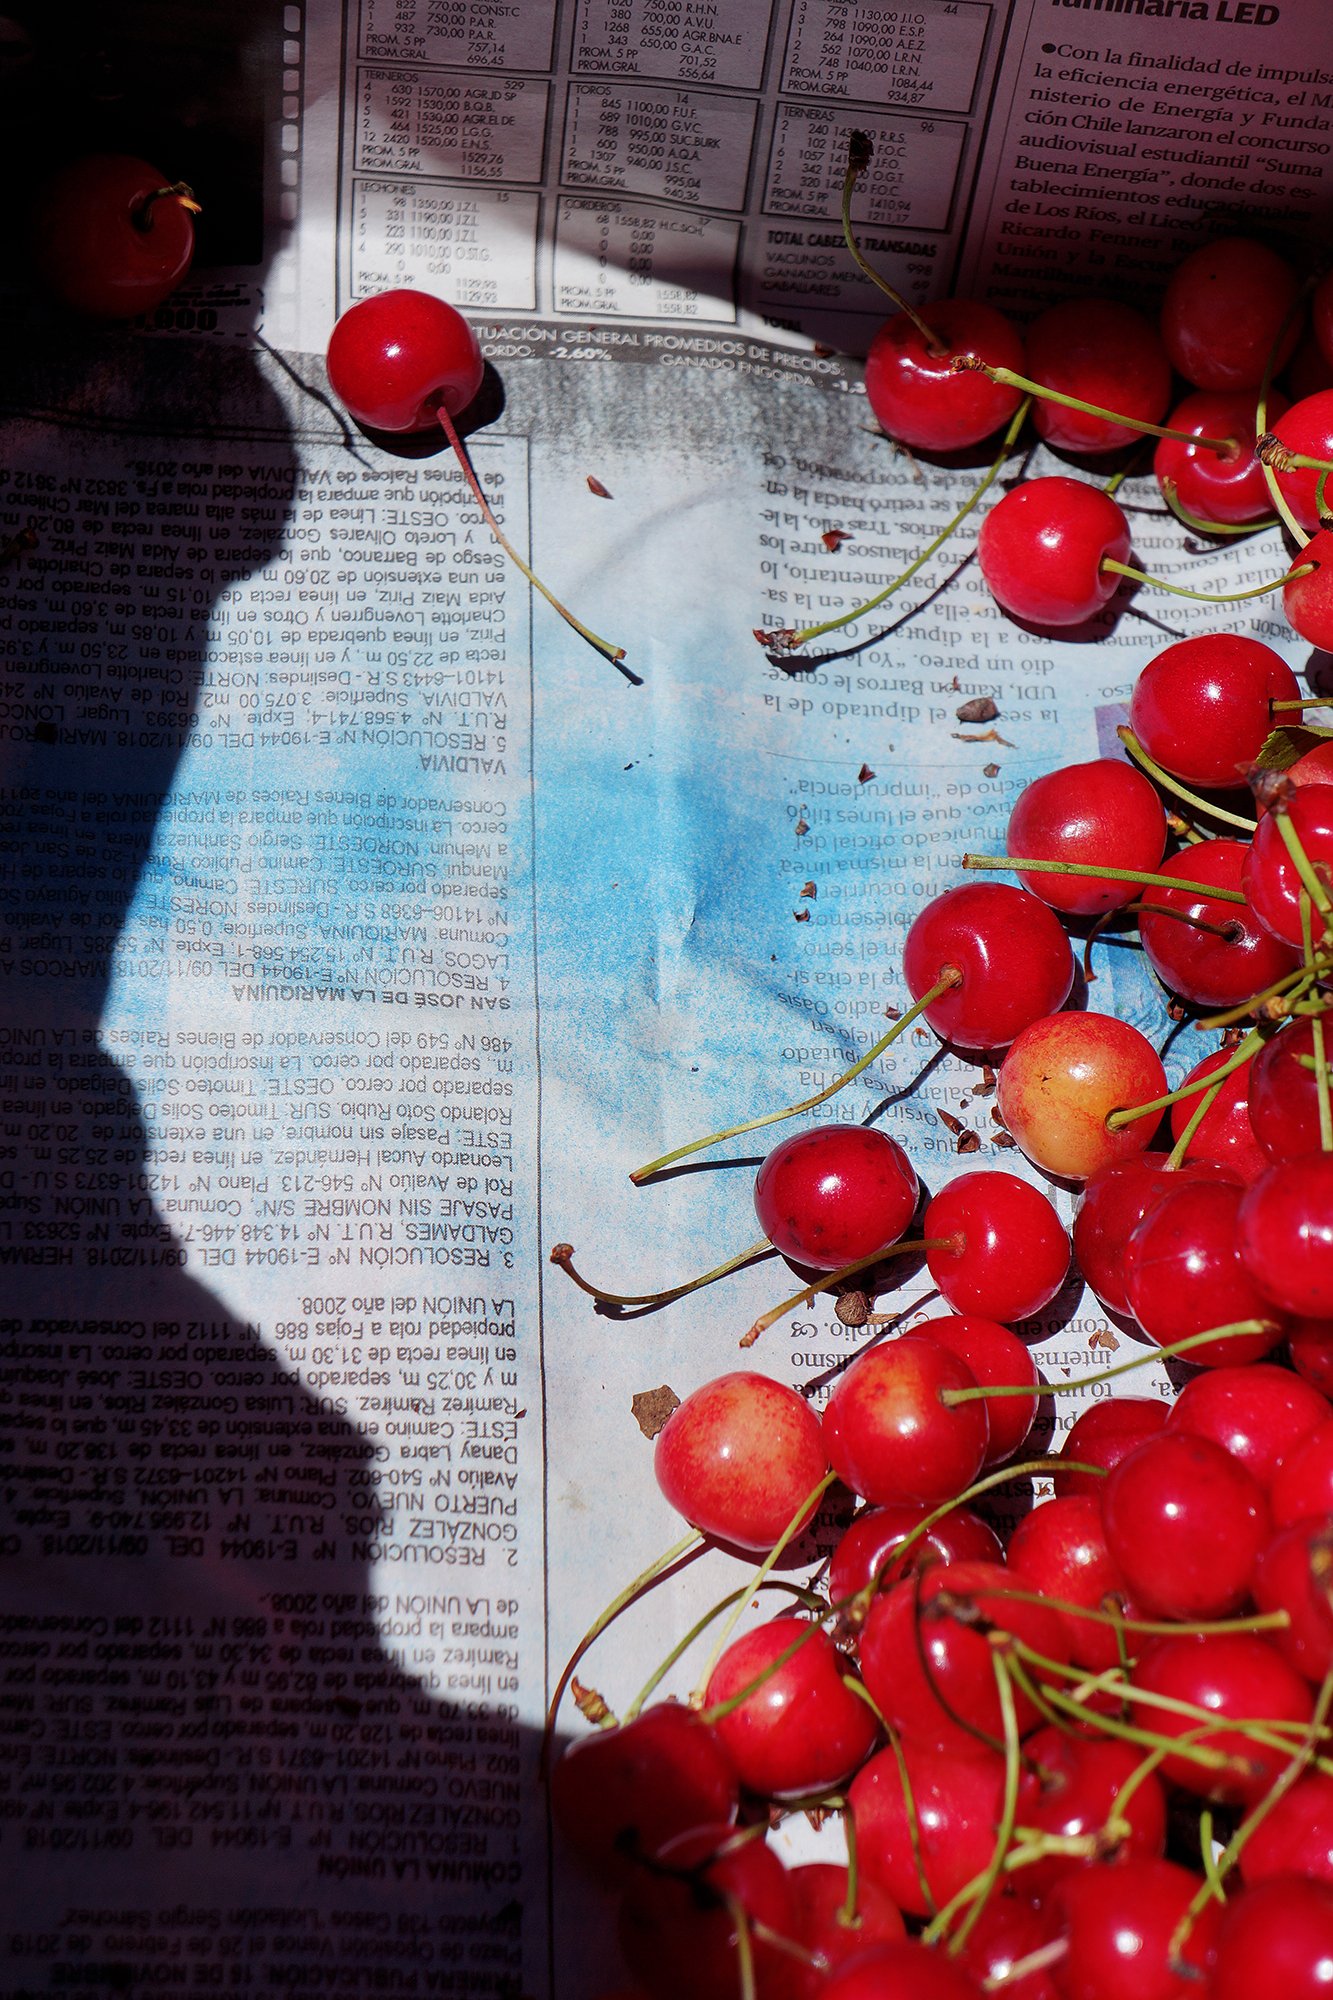 The edge of a pile of cherries on a blue-stained newspaper.